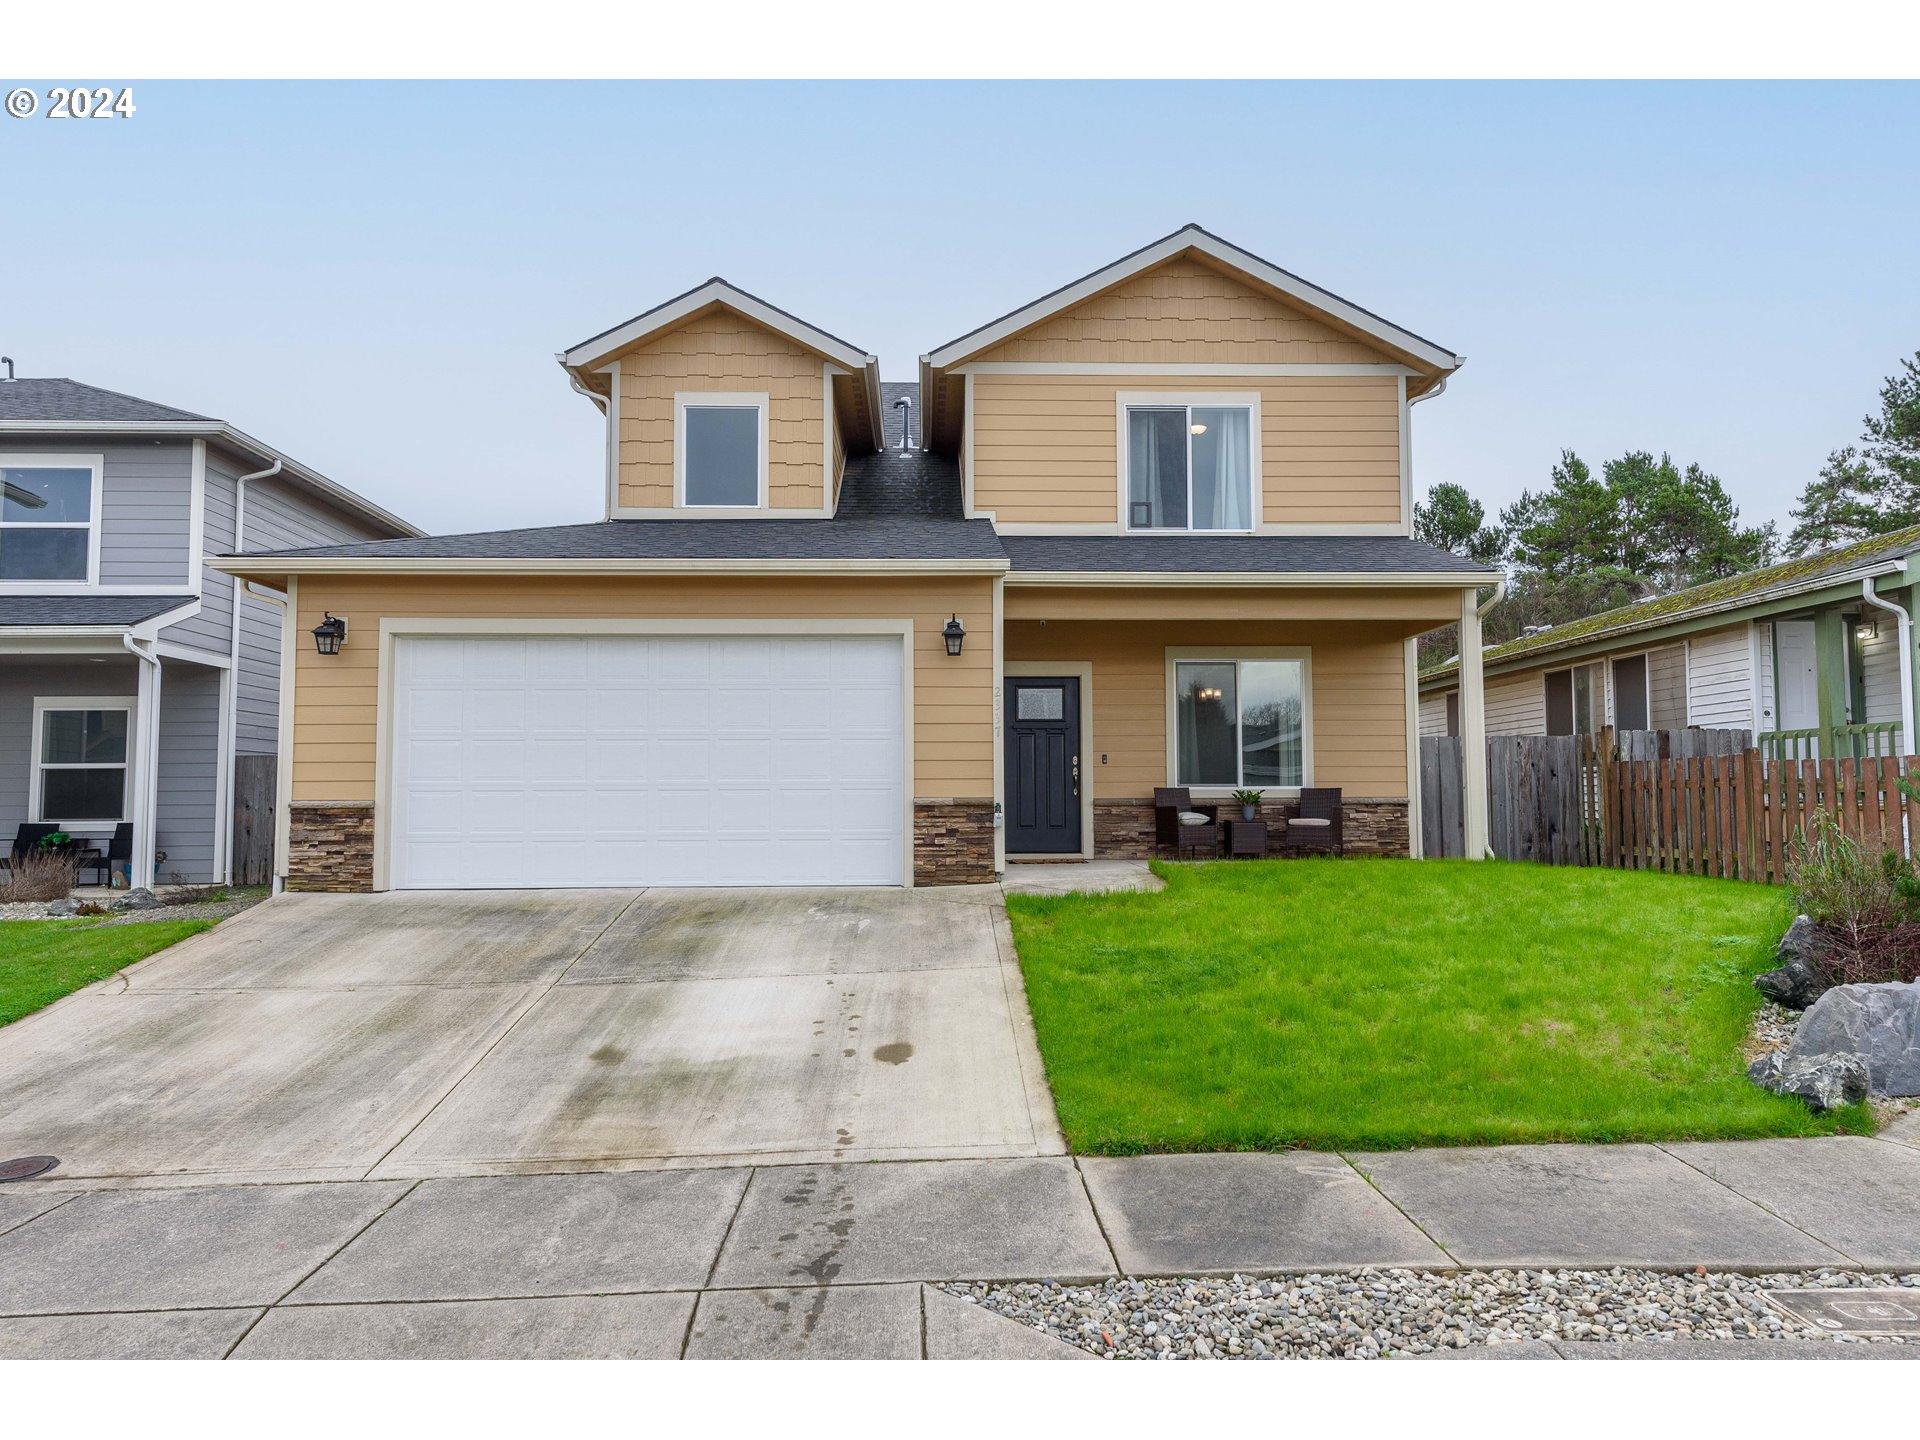 2337 LAURA LN, North Bend, OR 